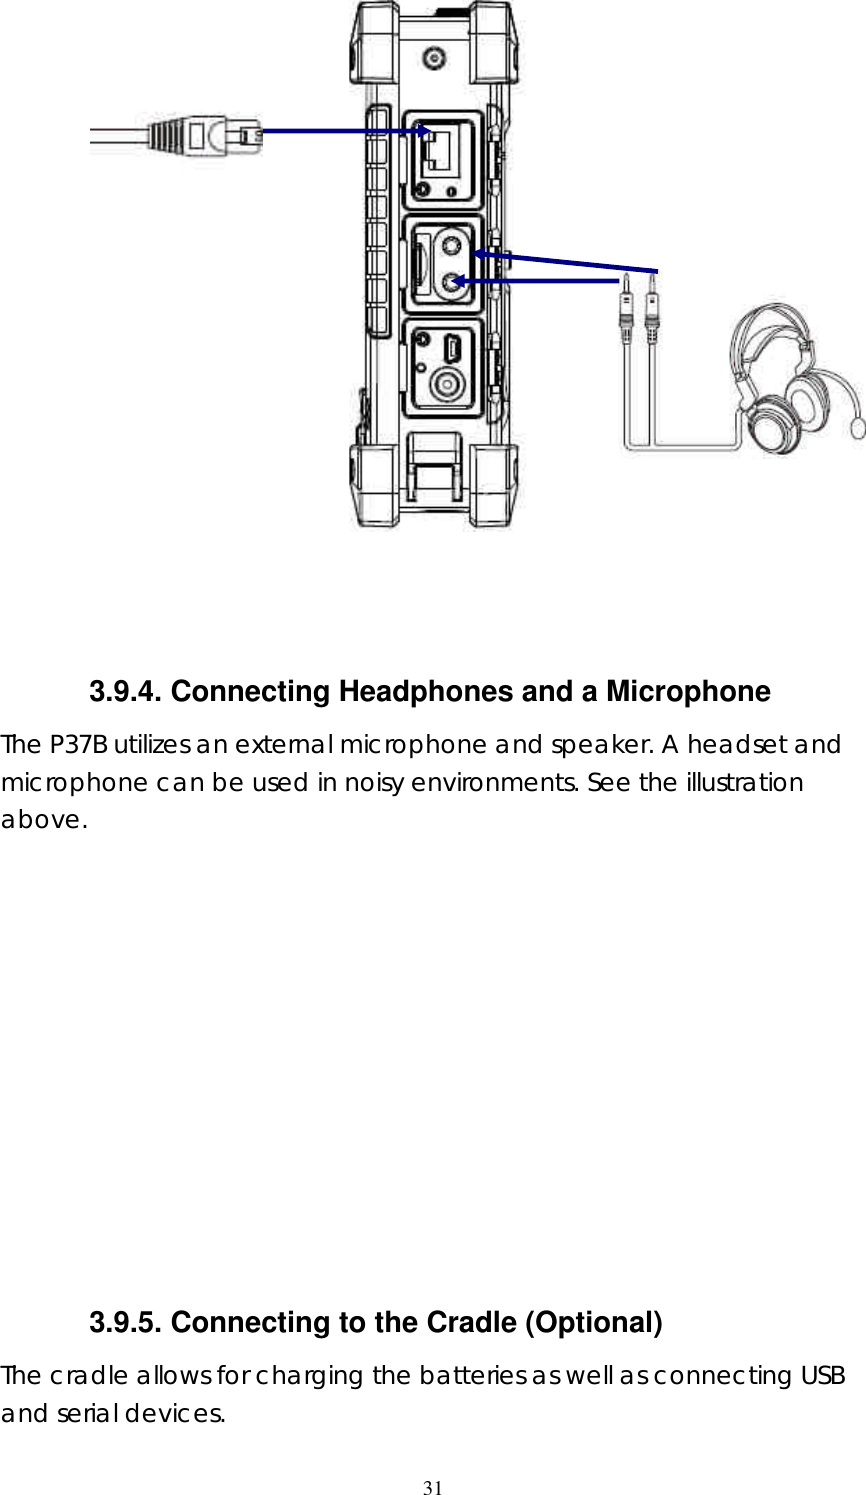  31    3.9.4. Connecting Headphones and a Microphone The P37B utilizes an external microphone and speaker. A headset and microphone can be used in noisy environments. See the illustration above.             3.9.5. Connecting to the Cradle (Optional) The cradle allows for charging the batteries as well as connecting USB and serial devices.   